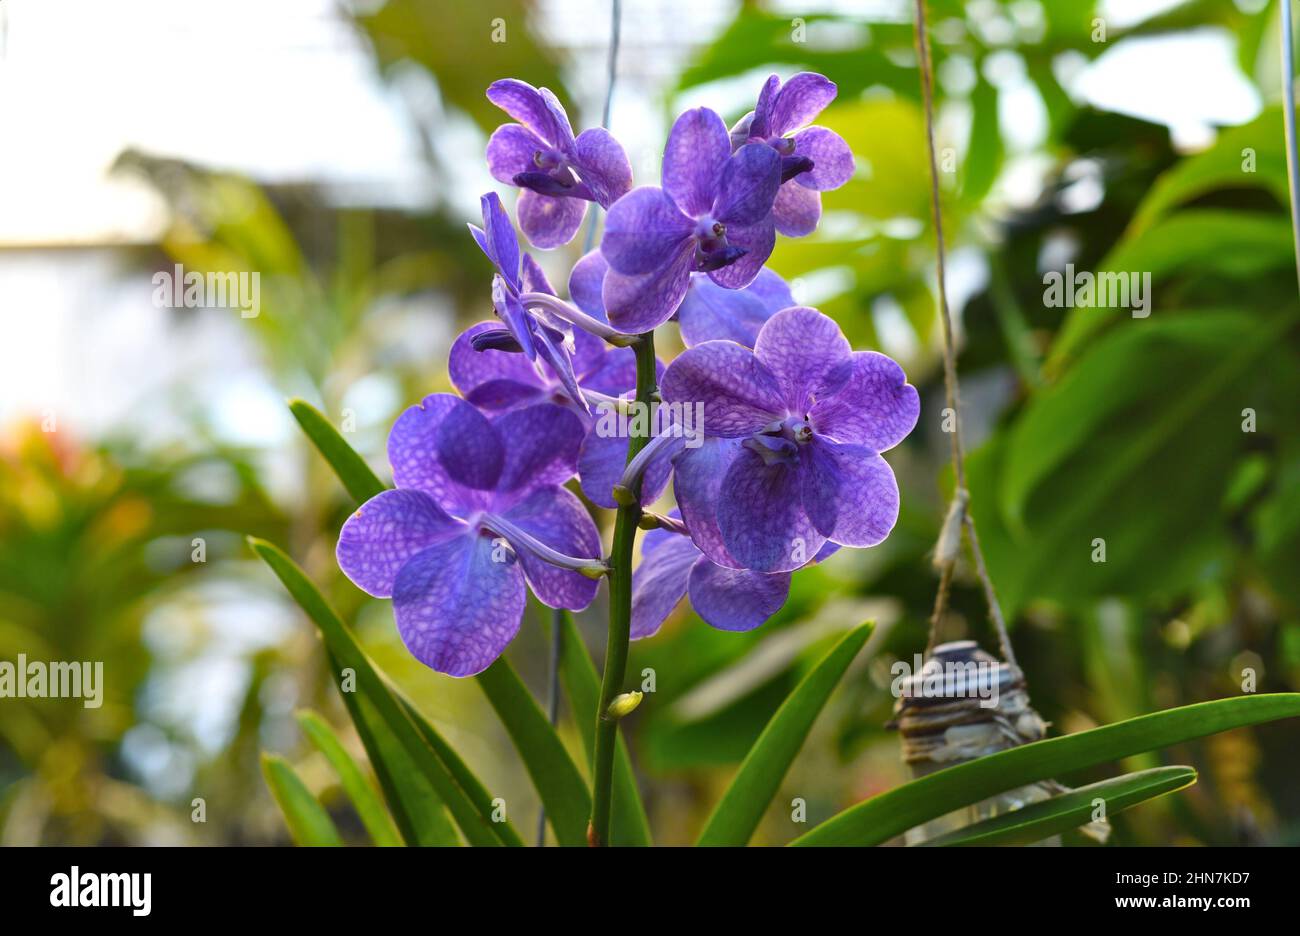 Branch of orchid Vanda against green leaves Stock Photo